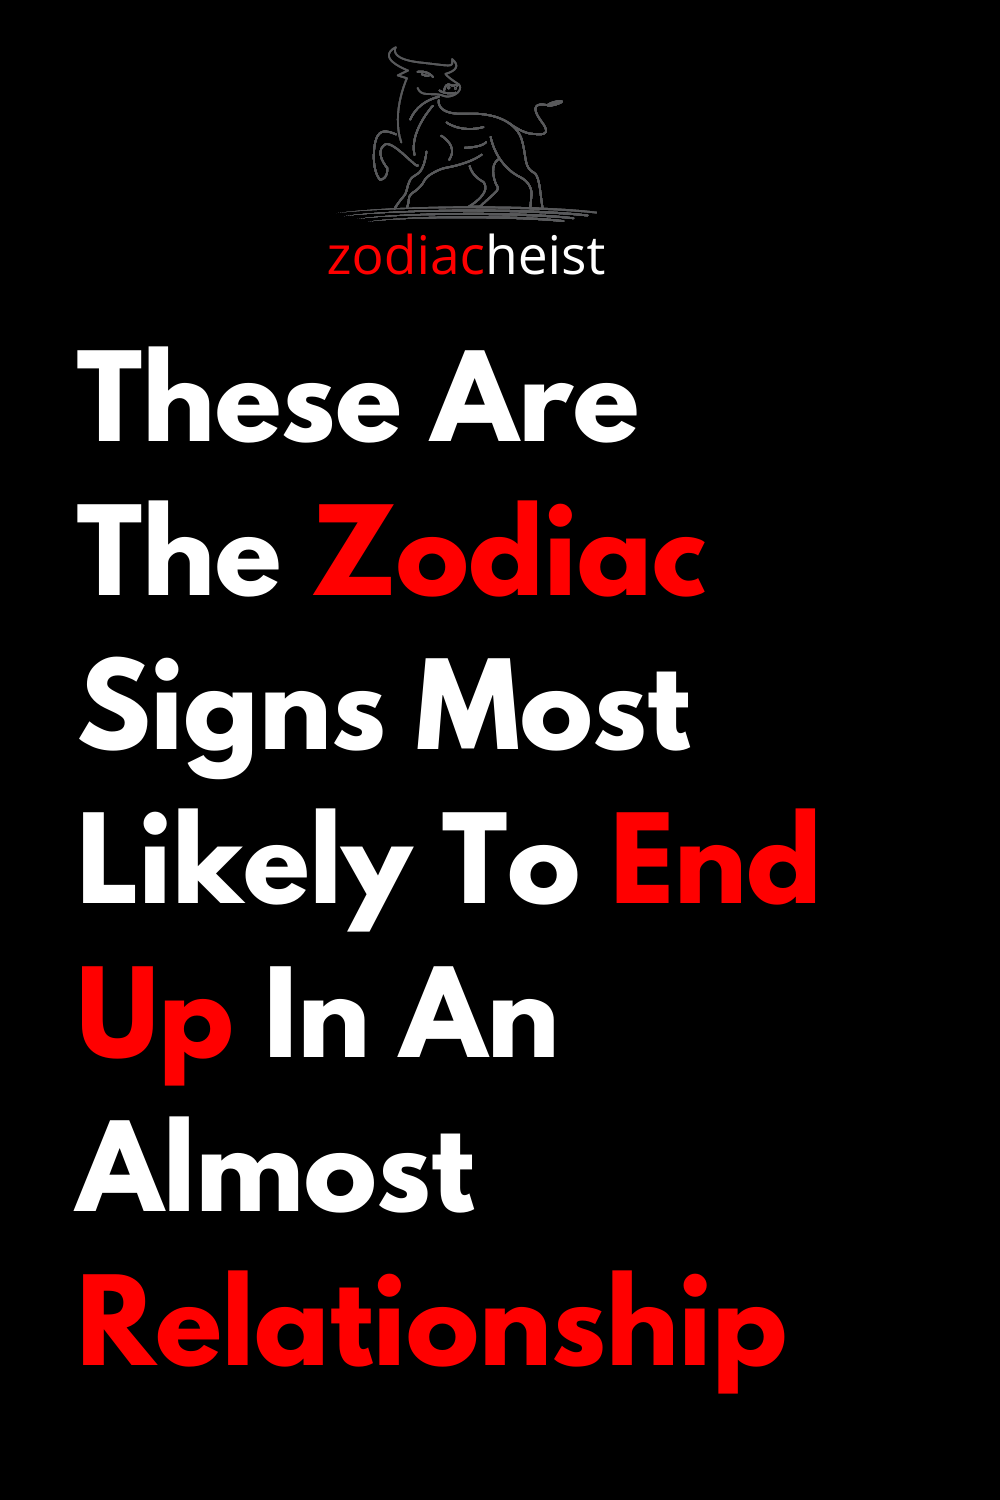 These Are The Zodiac Signs Most Likely To End Up In An Almost Relationship